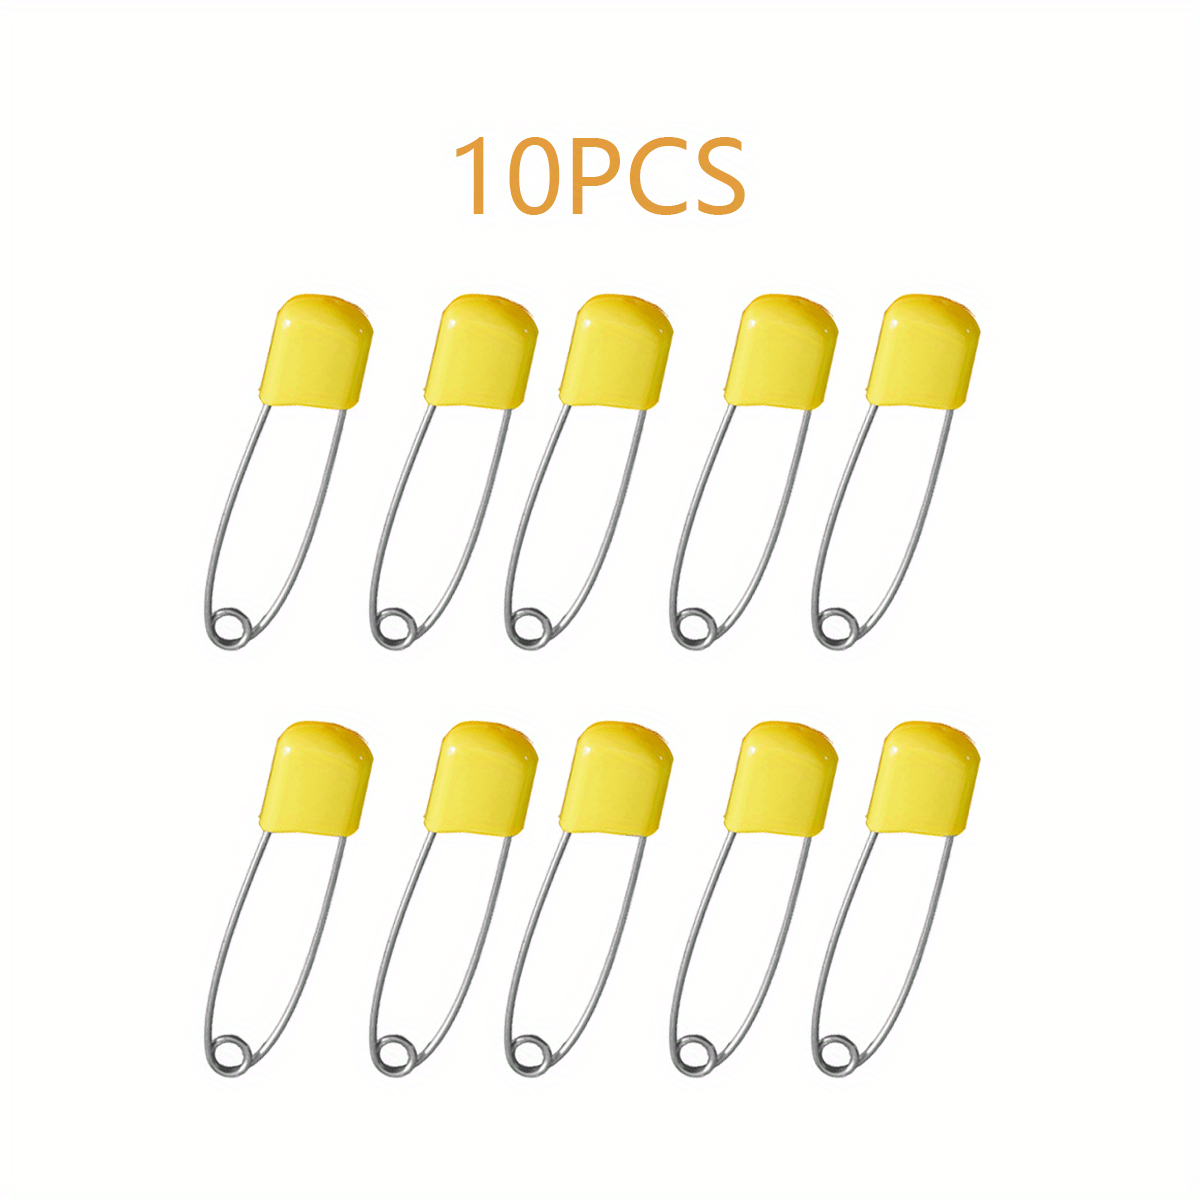 Dropship Dukal Pack Of 1440 Nickel Finish Diaper Pins 1 1/4. Safety Pins  Bulk For Garment Art Craft. Sturdy Clasp And Cover. Rust-Resistant Pins  Home Office Use. Sewing Accessories For Baby Clothing.